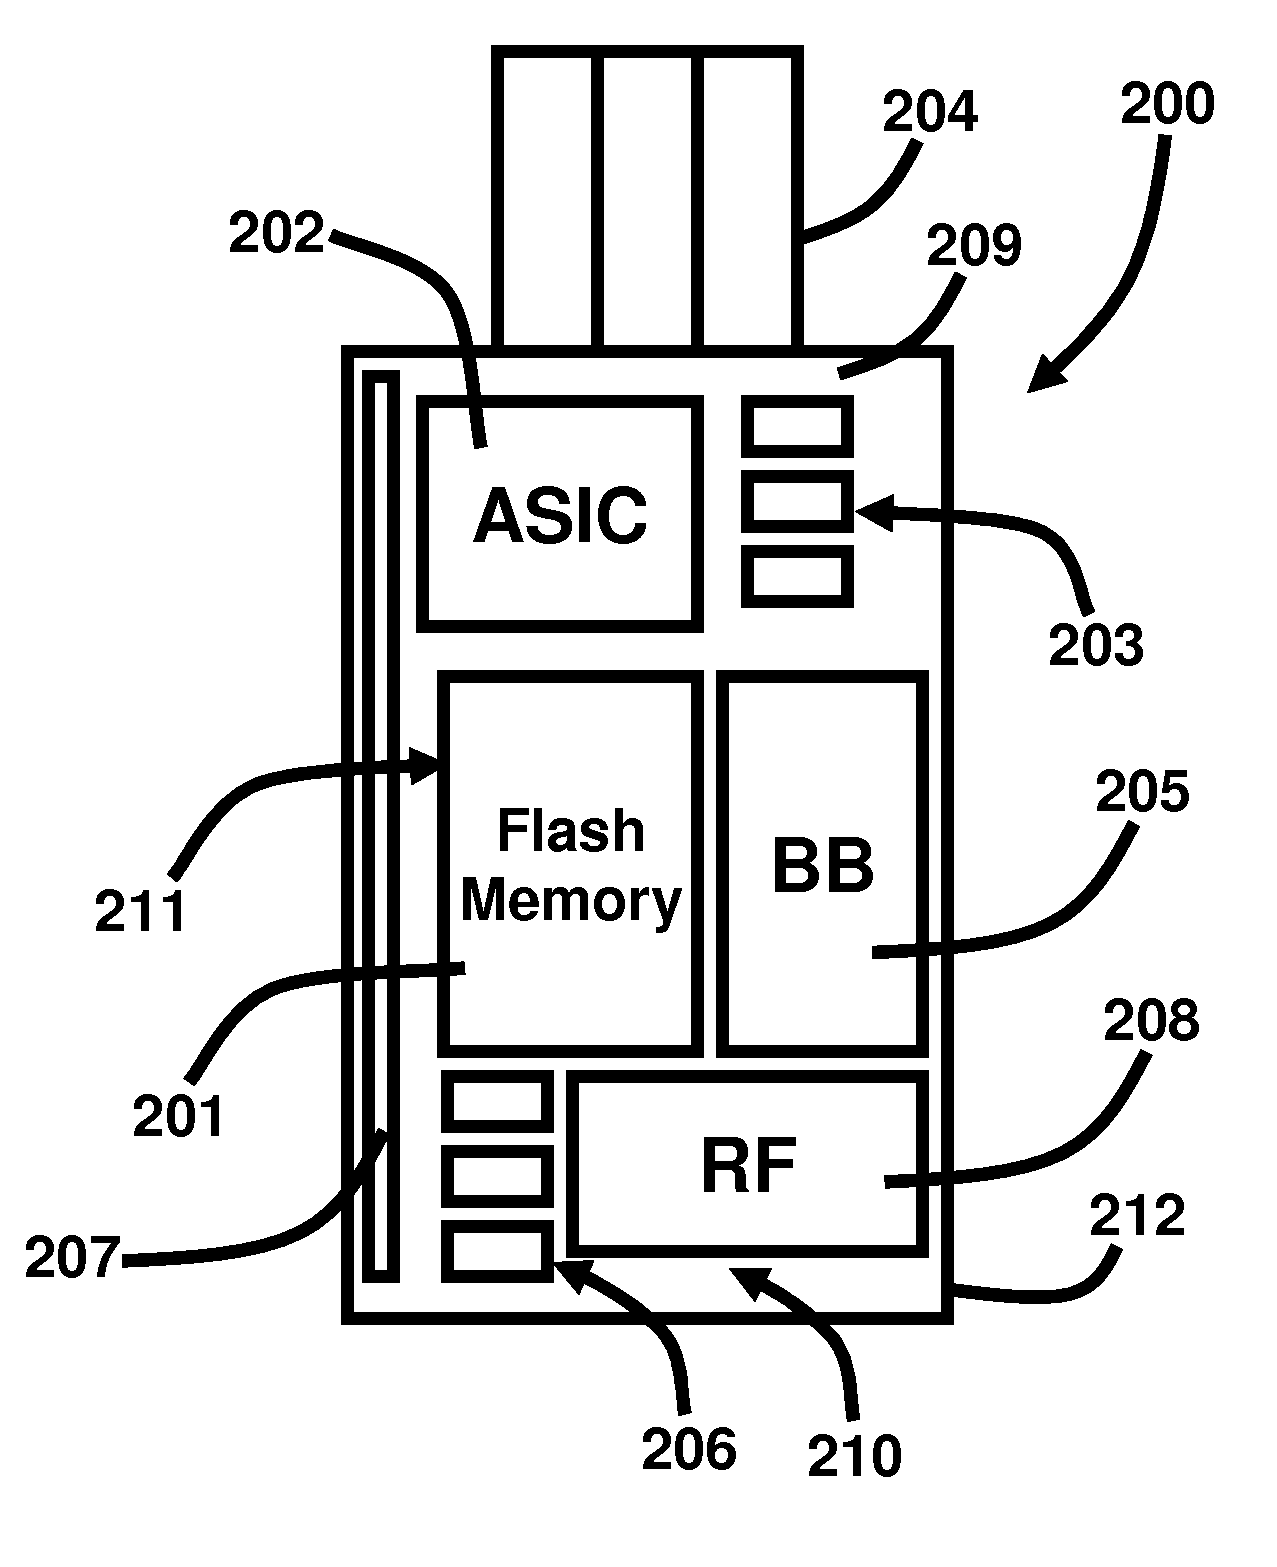 USB device that provides wireless data access, digital TV access, radio, and storage capability